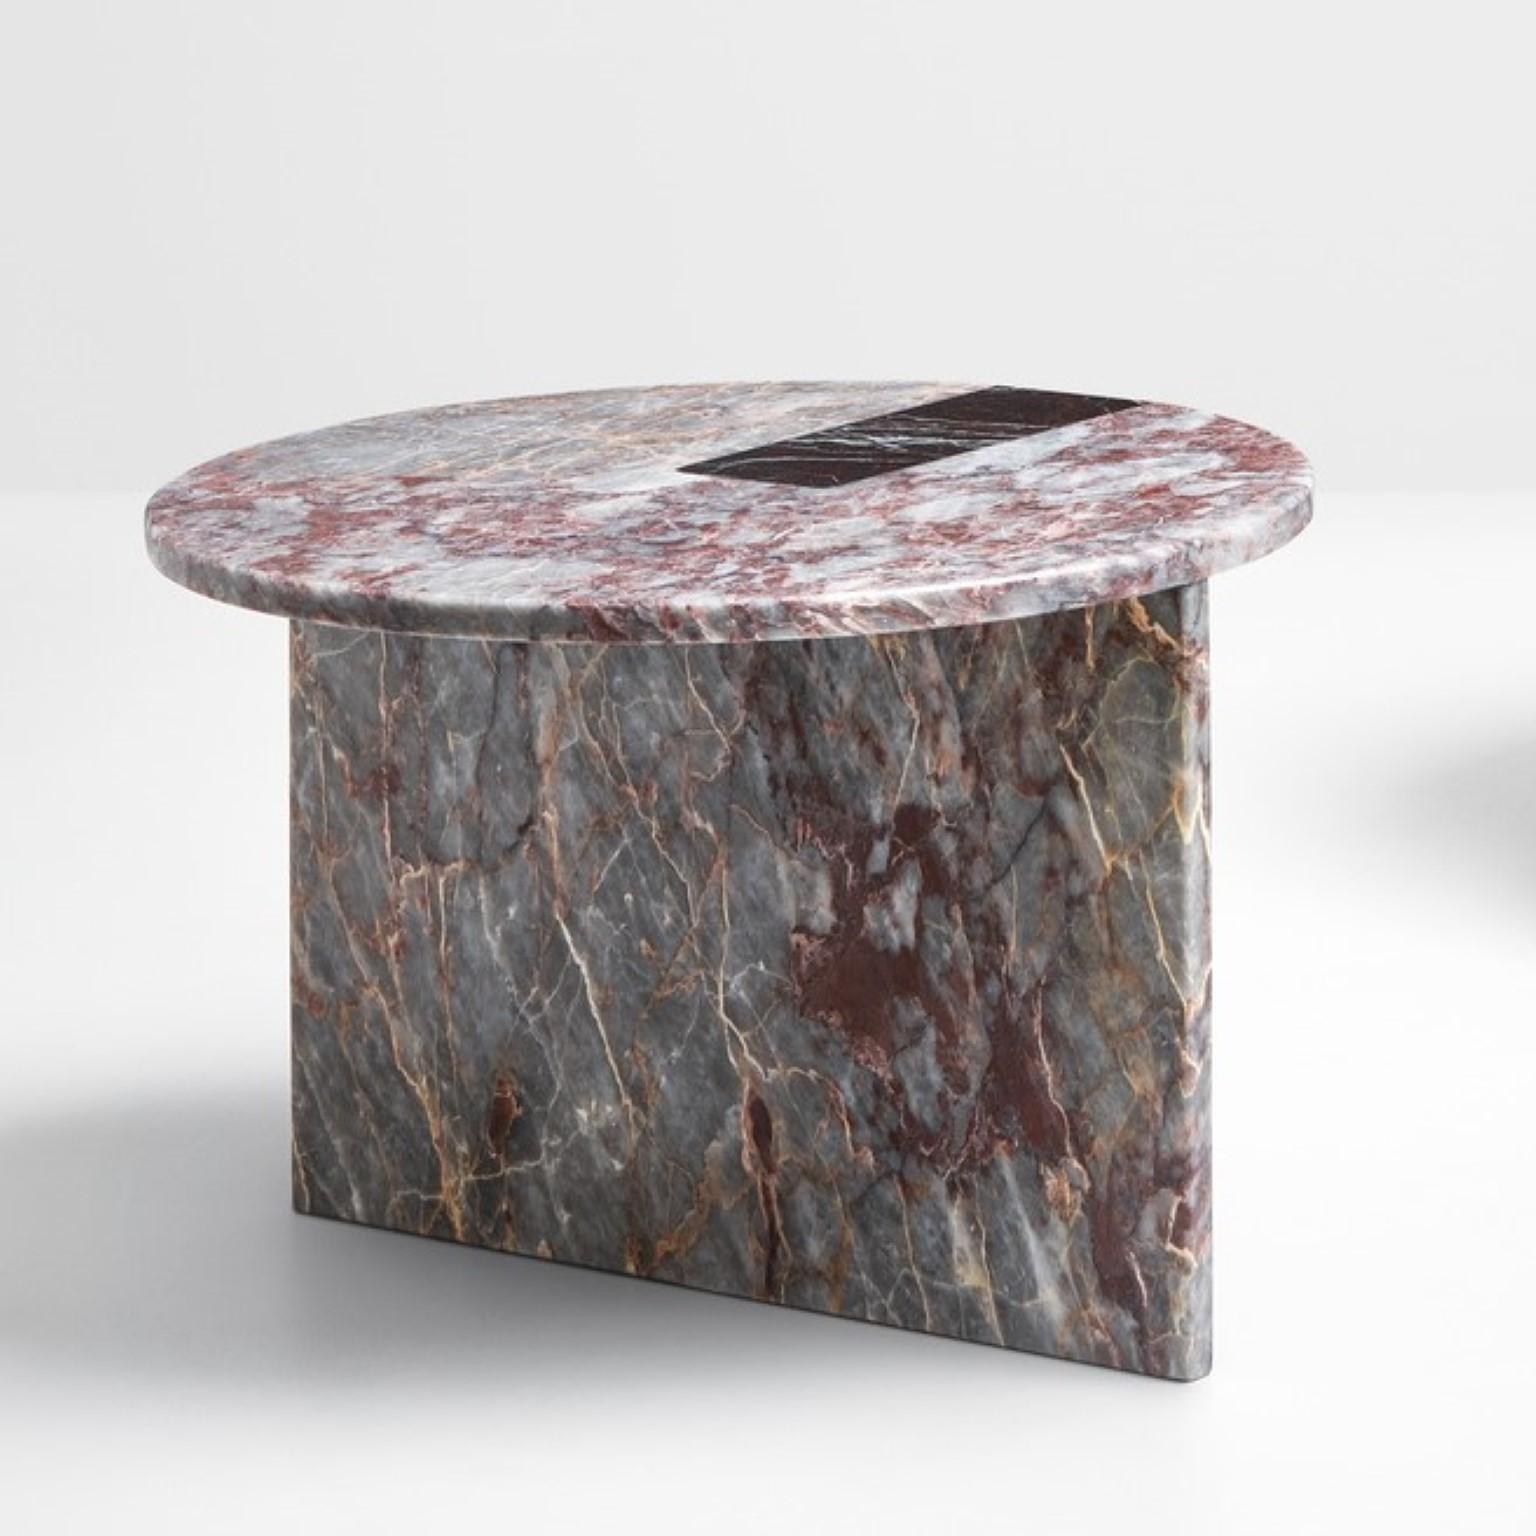 Colouring onyx table by OS and OOS
Dimensions: ø 55 x 40 cm
Materials: Rosso levante and salomé / carrara and concrete / red mdf and rosso verona
The table might be slightly different from the images as each table is unique and depends on the